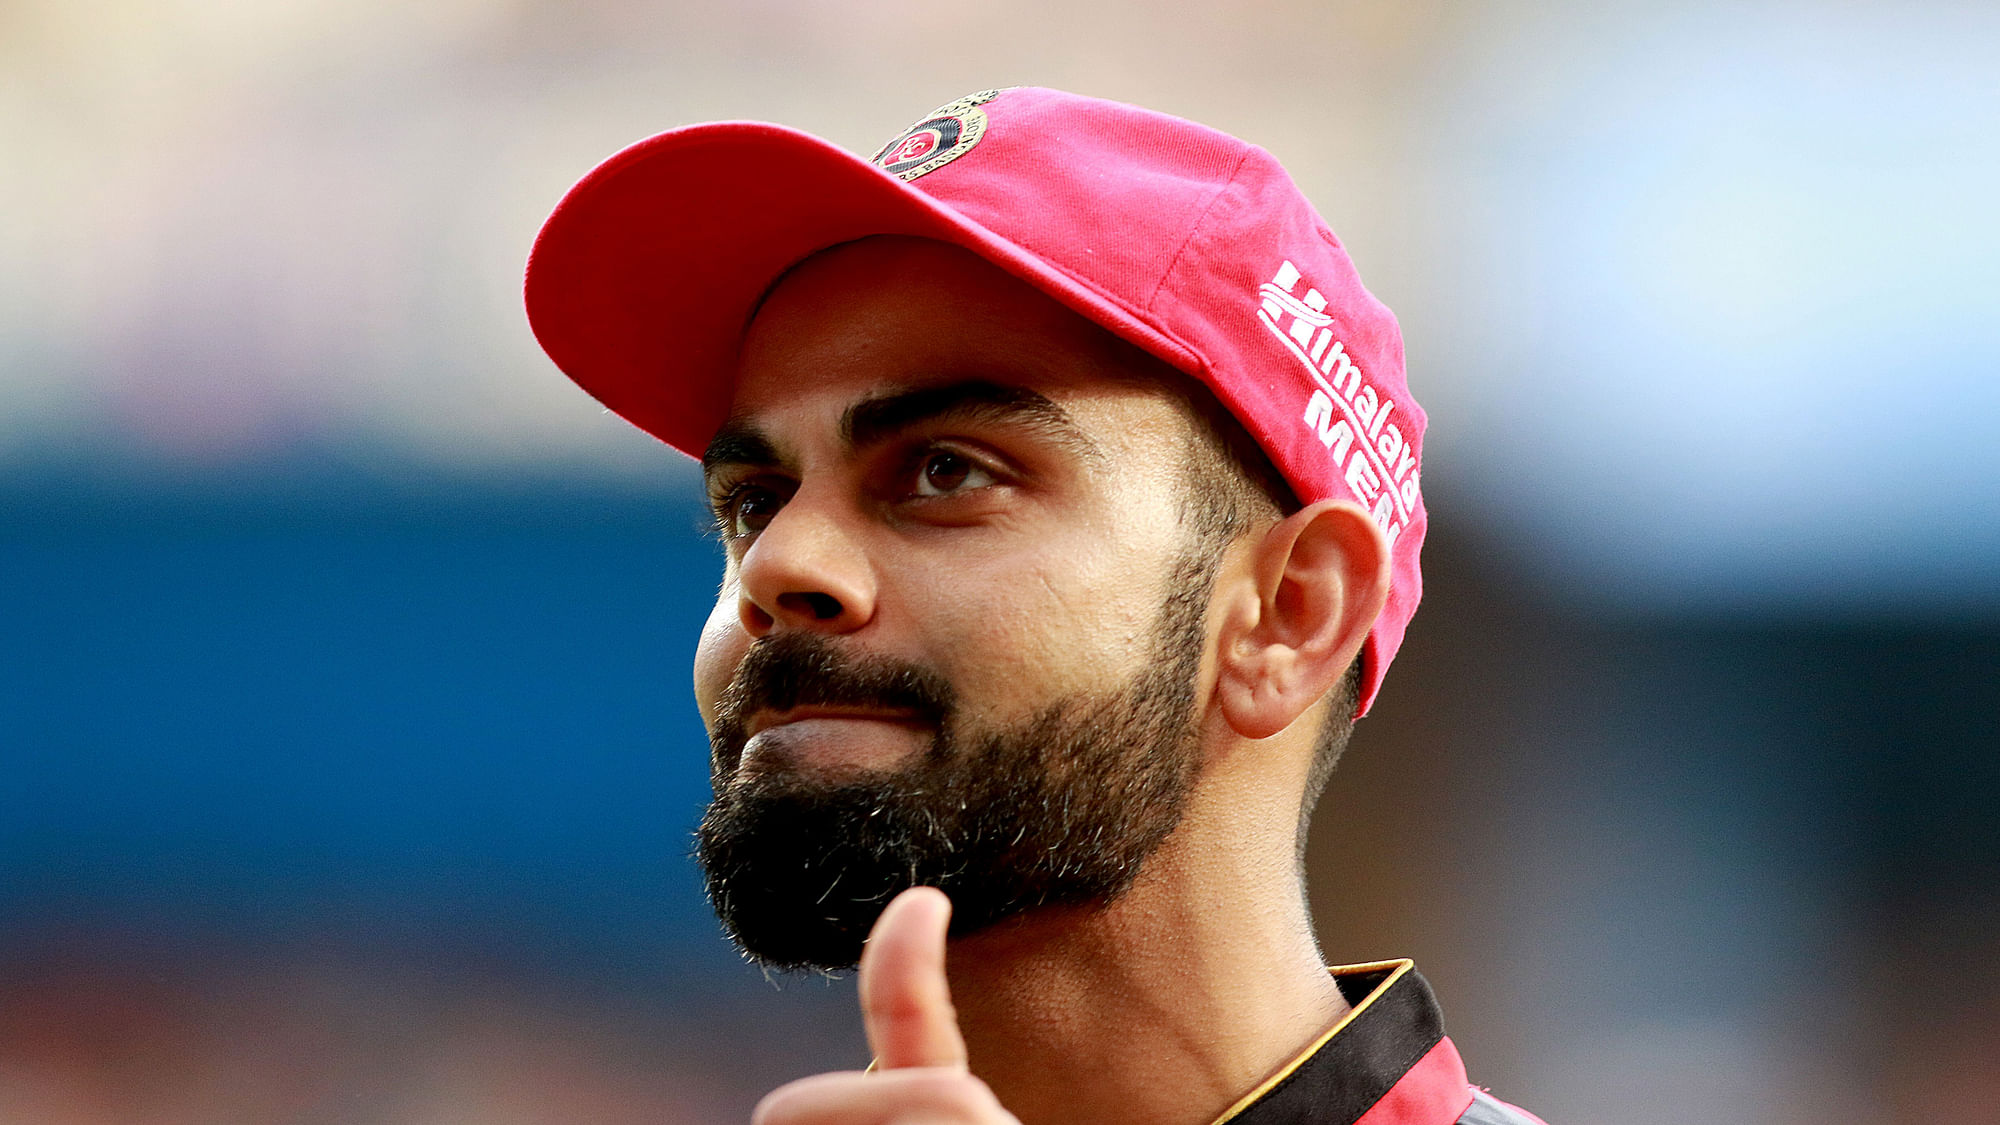 Virat Kohli thanked all the fans for supporting RCB. (Photo: BCCI)